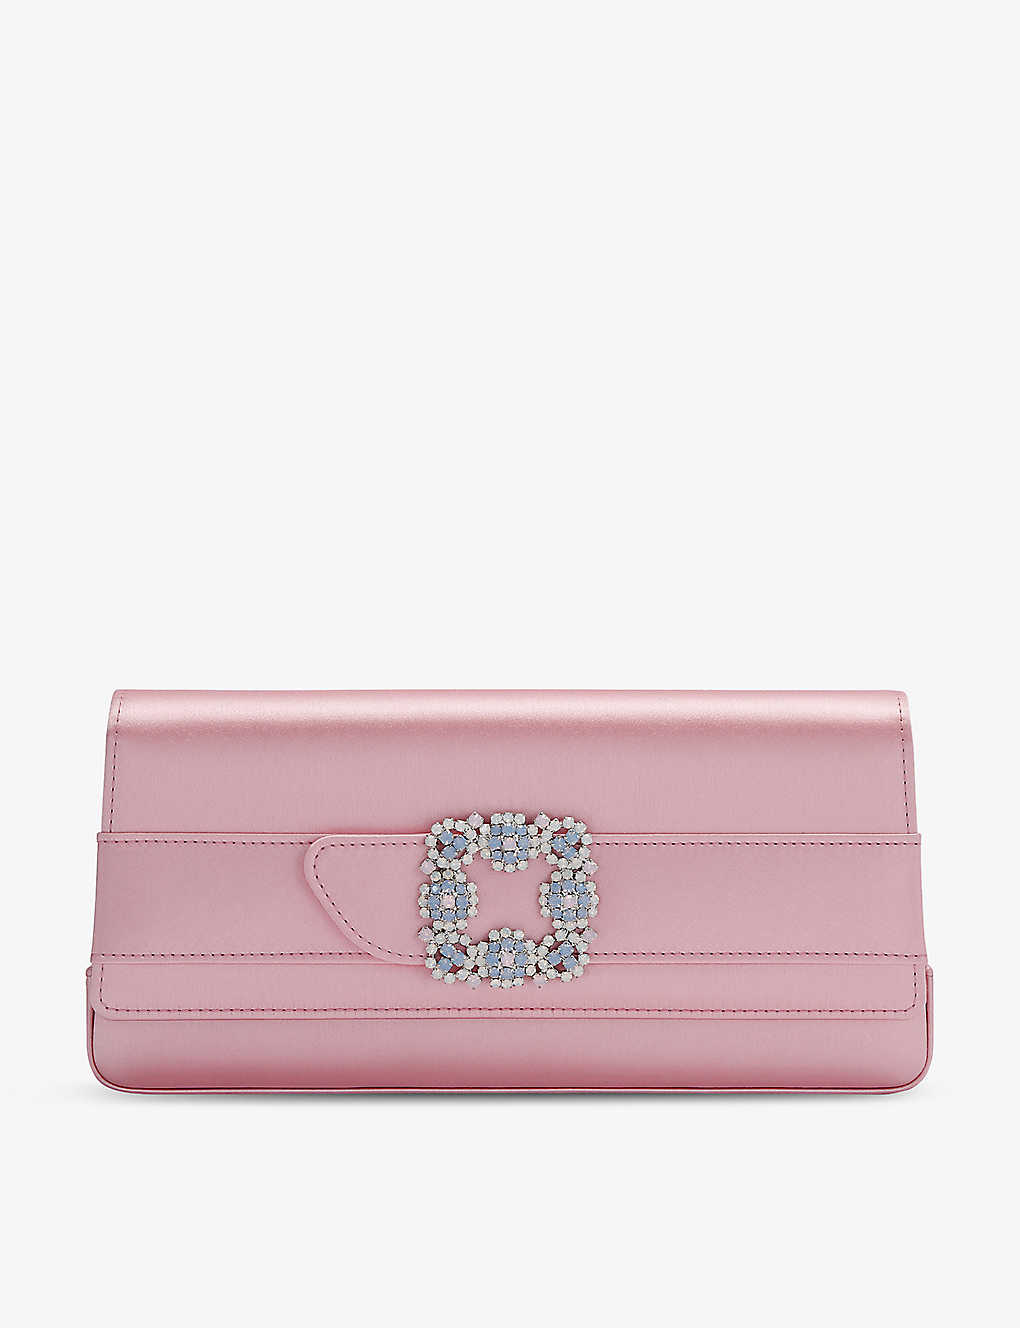 Manolo Blahnik Womens Pale Pink Gothisi Satin Clutch Bag In Light Pink